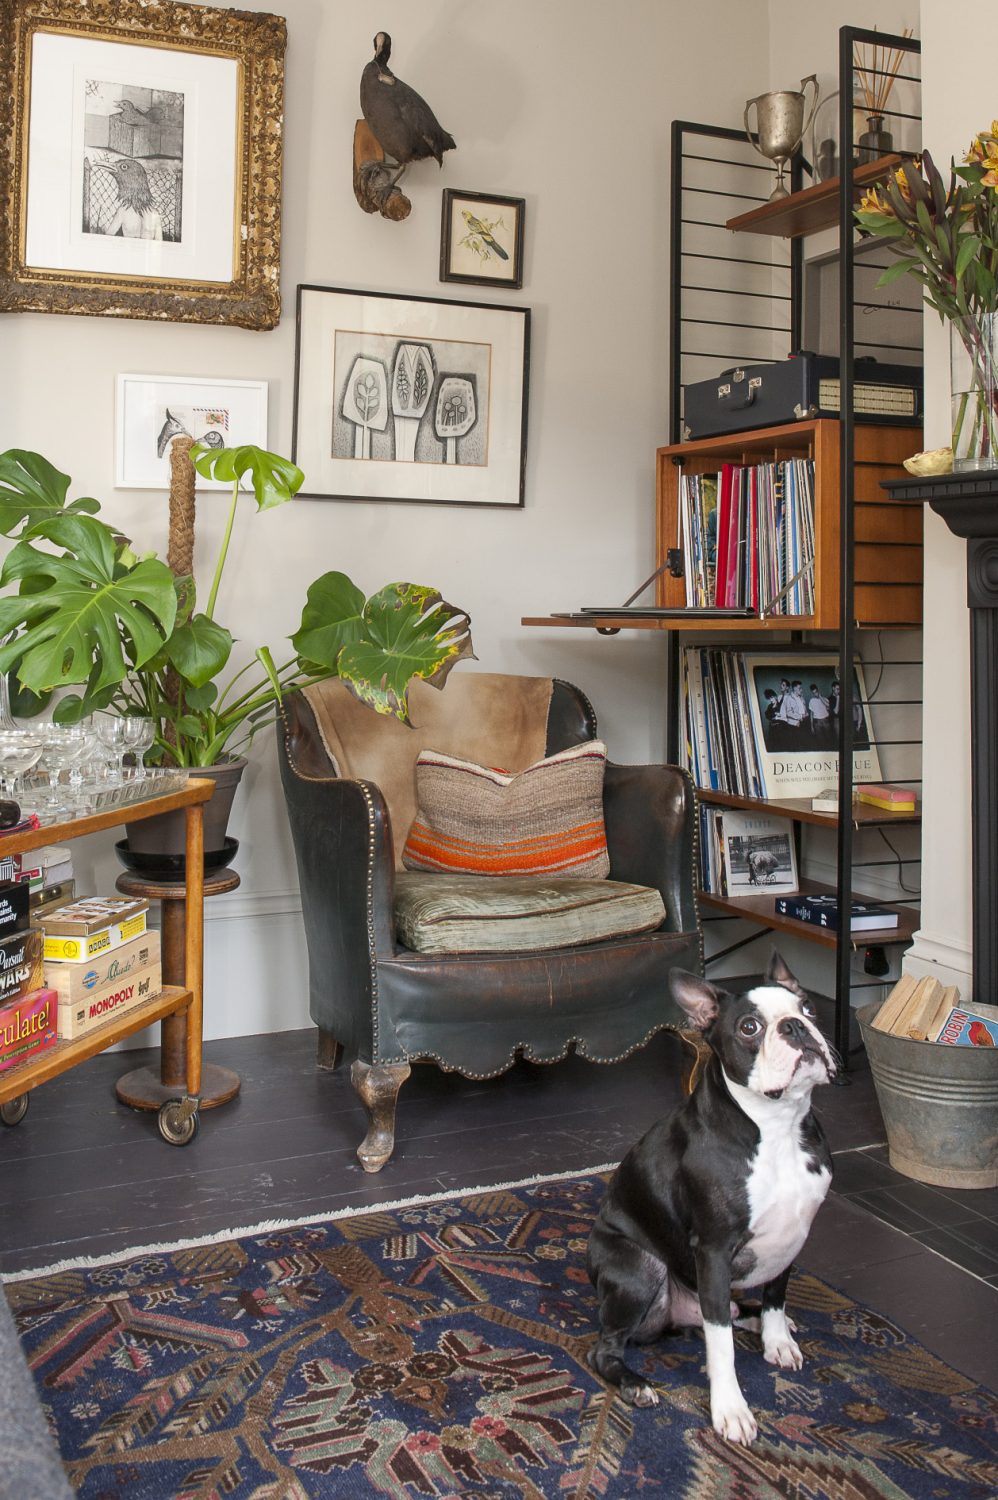 Cooper stands guard in the living room, with floorboards painted in Chocolate by Little Greene. The leather chair is one of a pair from France, found by a lady in St Leonards who has a shop called Sideshow Interiors. Artworks by Russell Loughlan have been carefully placed on the wall